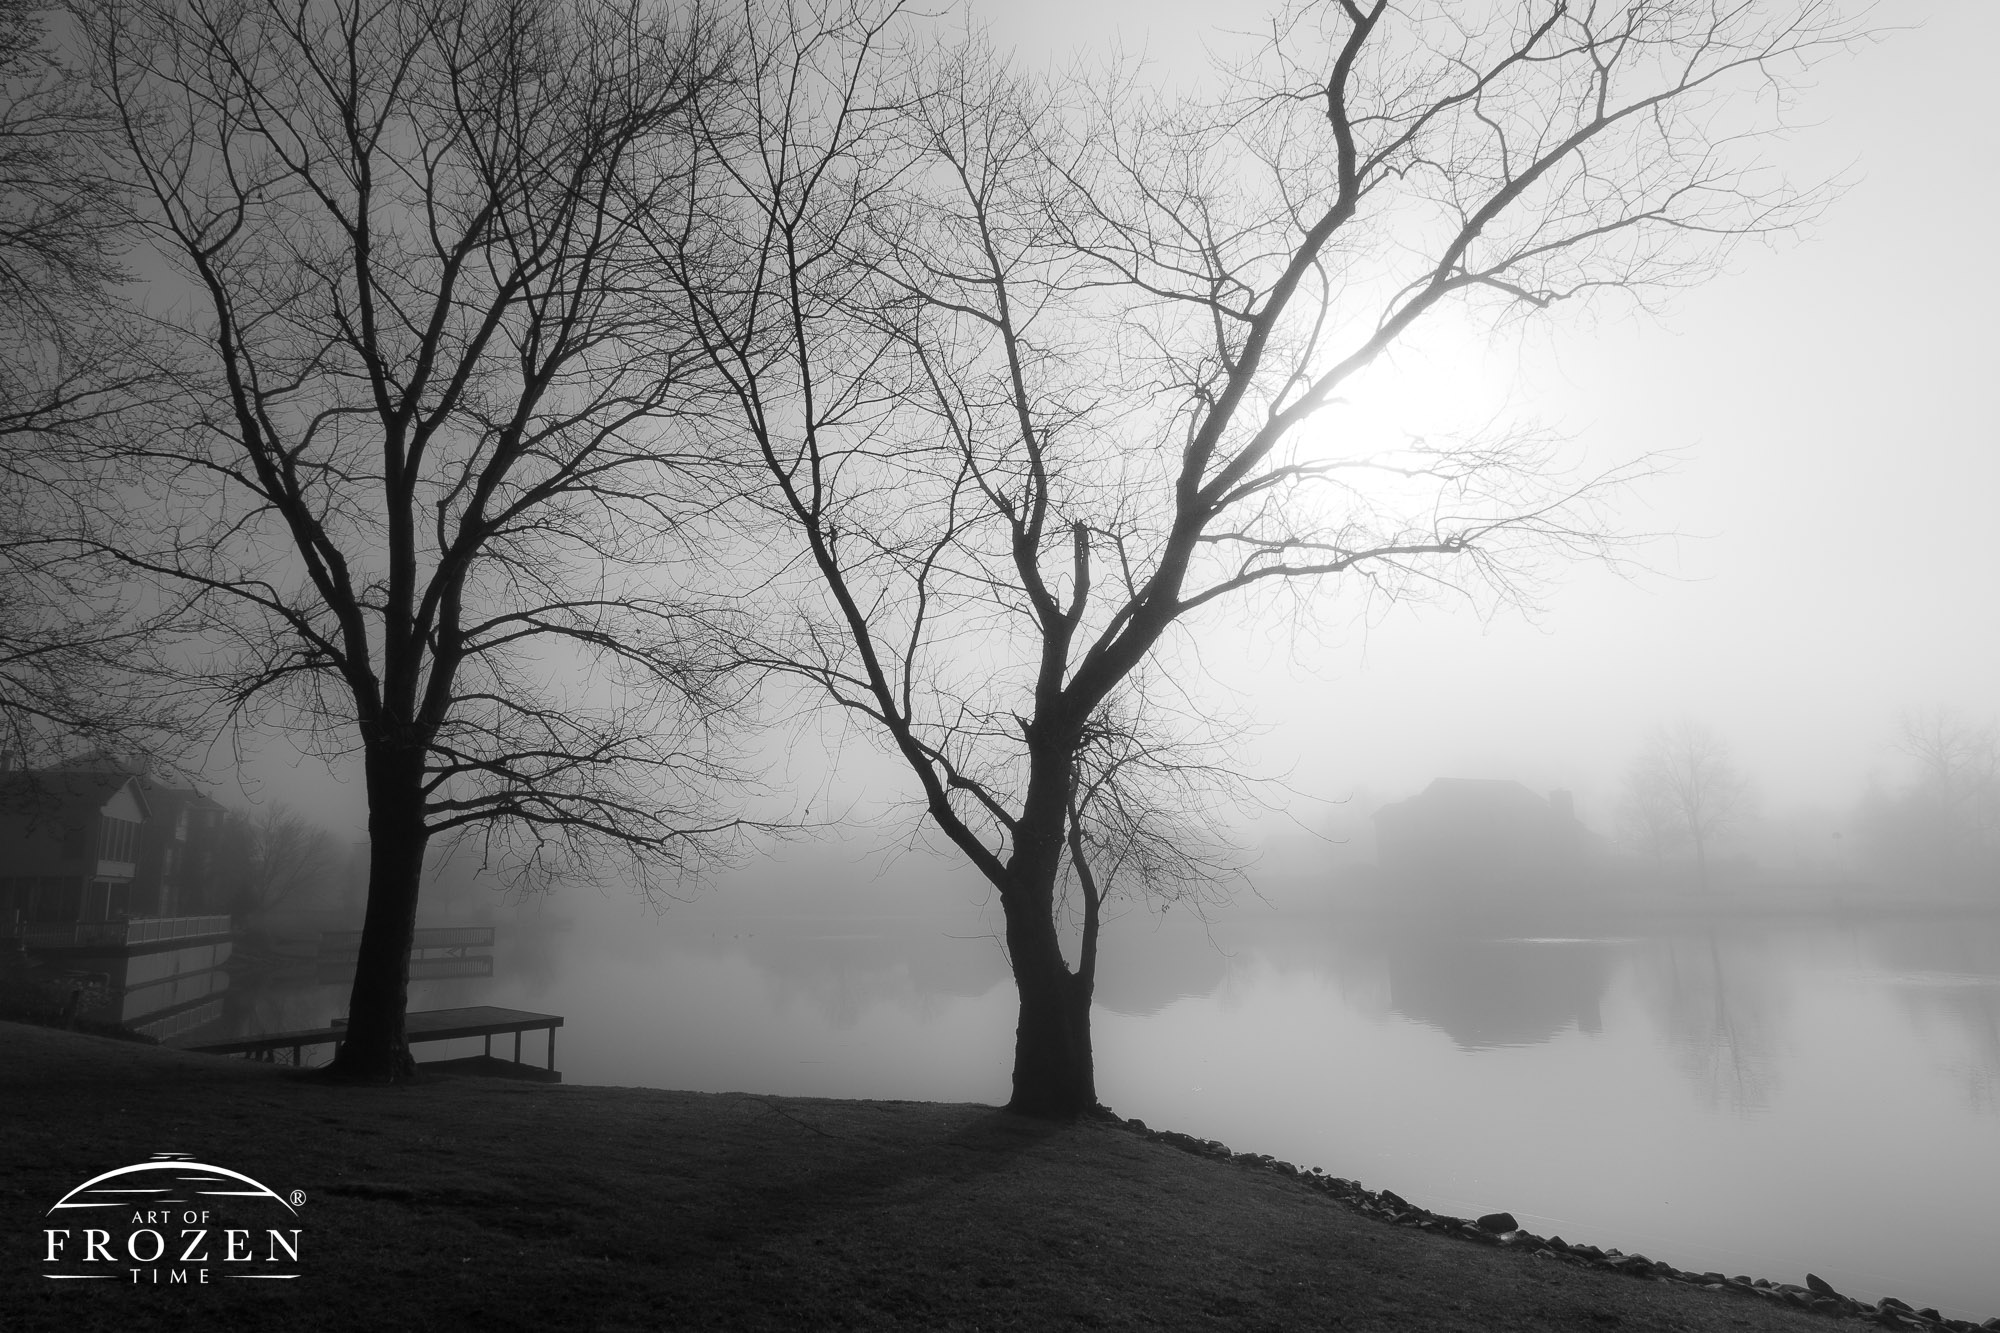 A pond scene where two bare silver maple trees form silhouettes against the foggy background